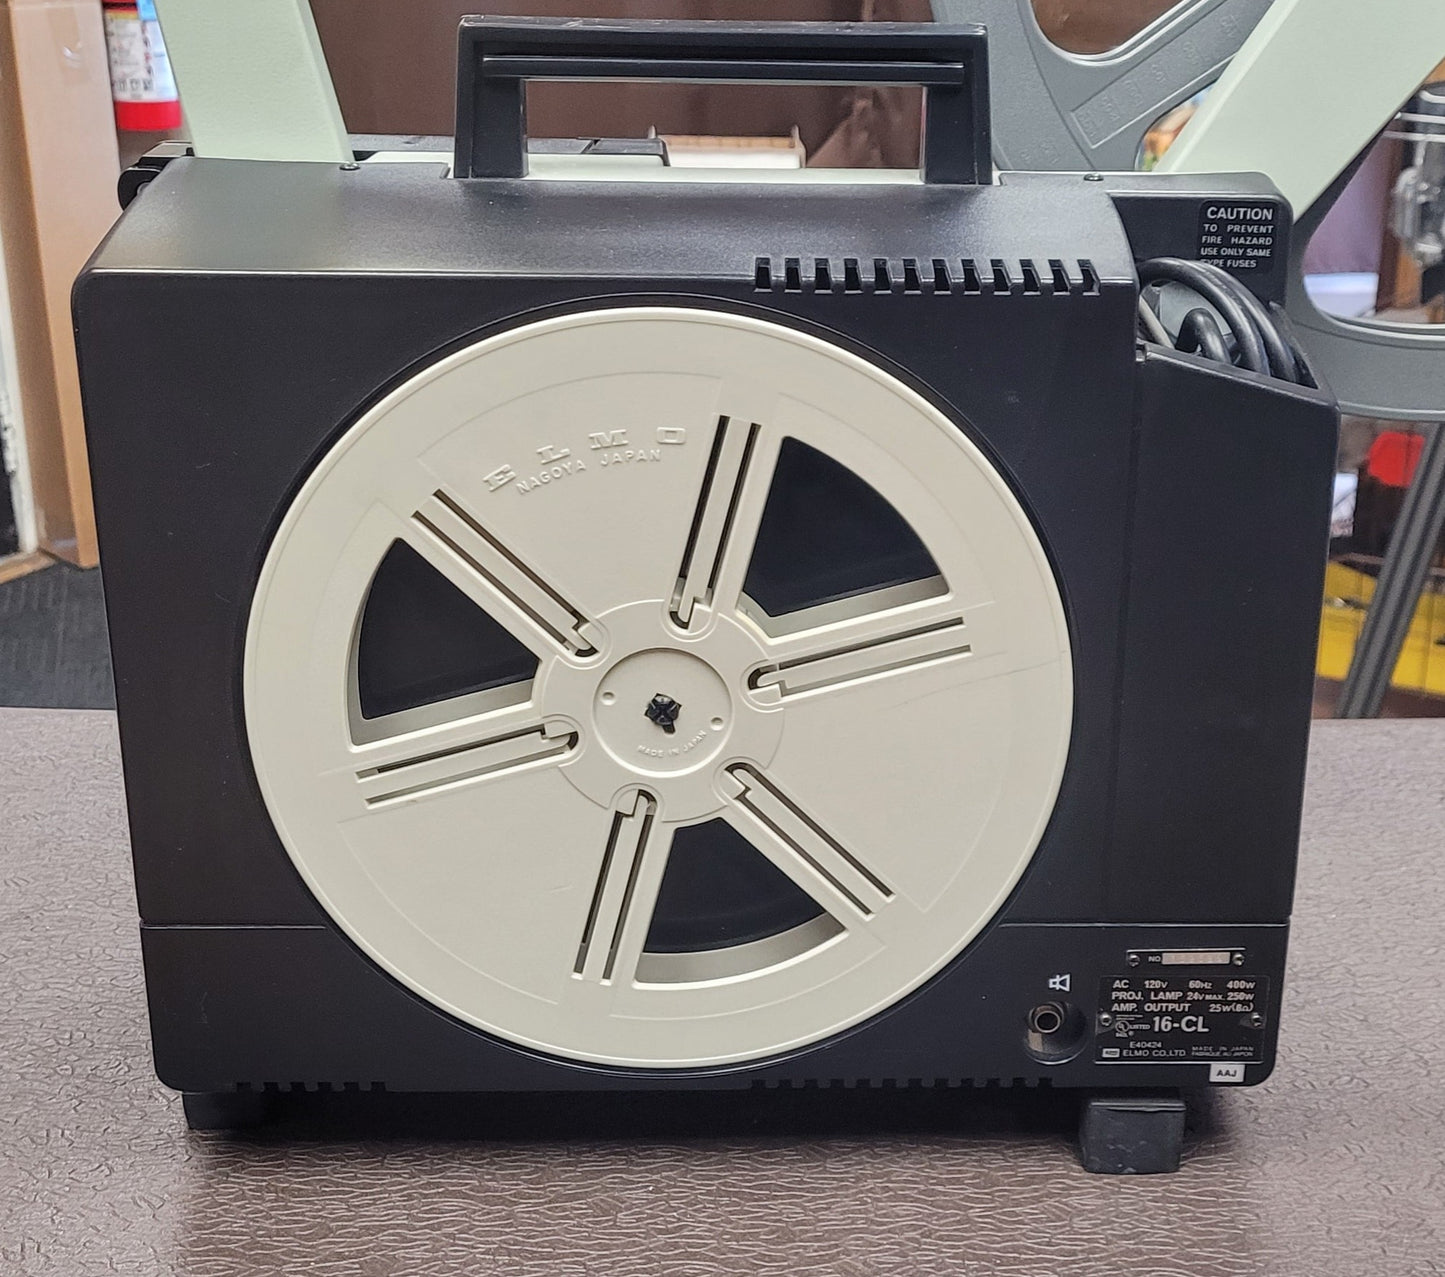 Elmo 16-CL Optical Channel Load 16mm Sound Projector ( 5 Blade Shutter ) S# 159589